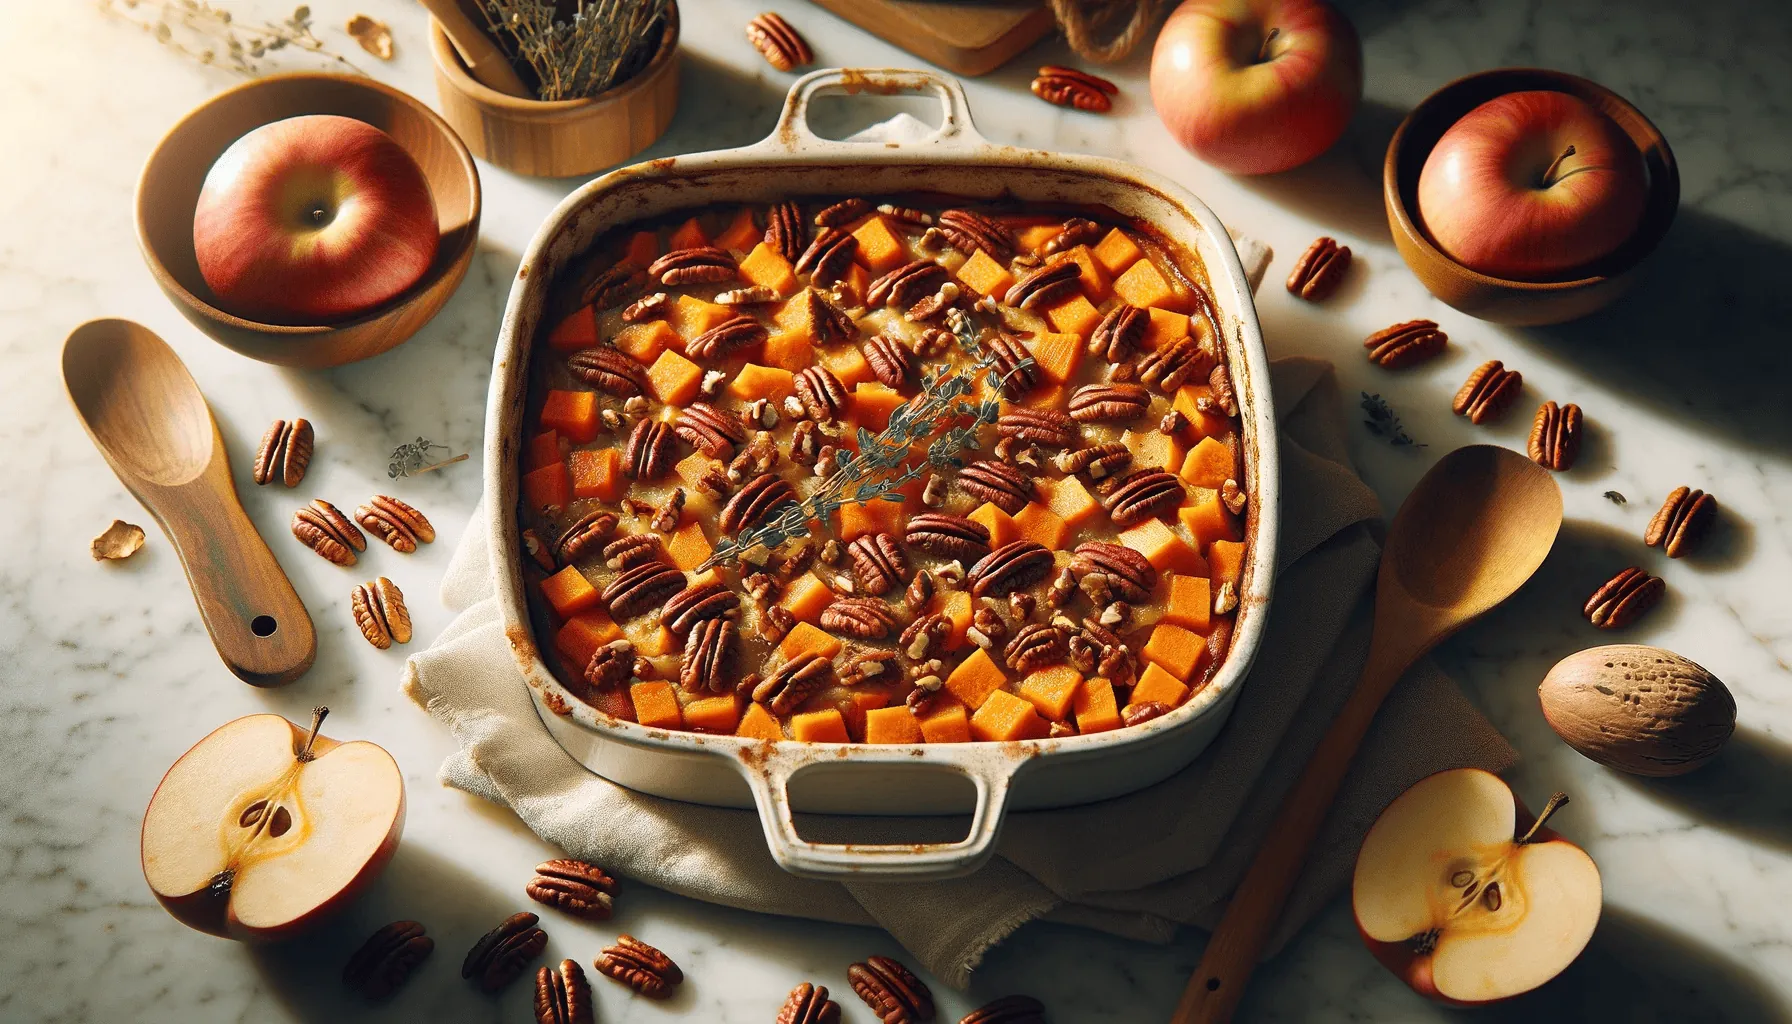 Completed sweet potato and apple casserole with a golden-brown pecan topping